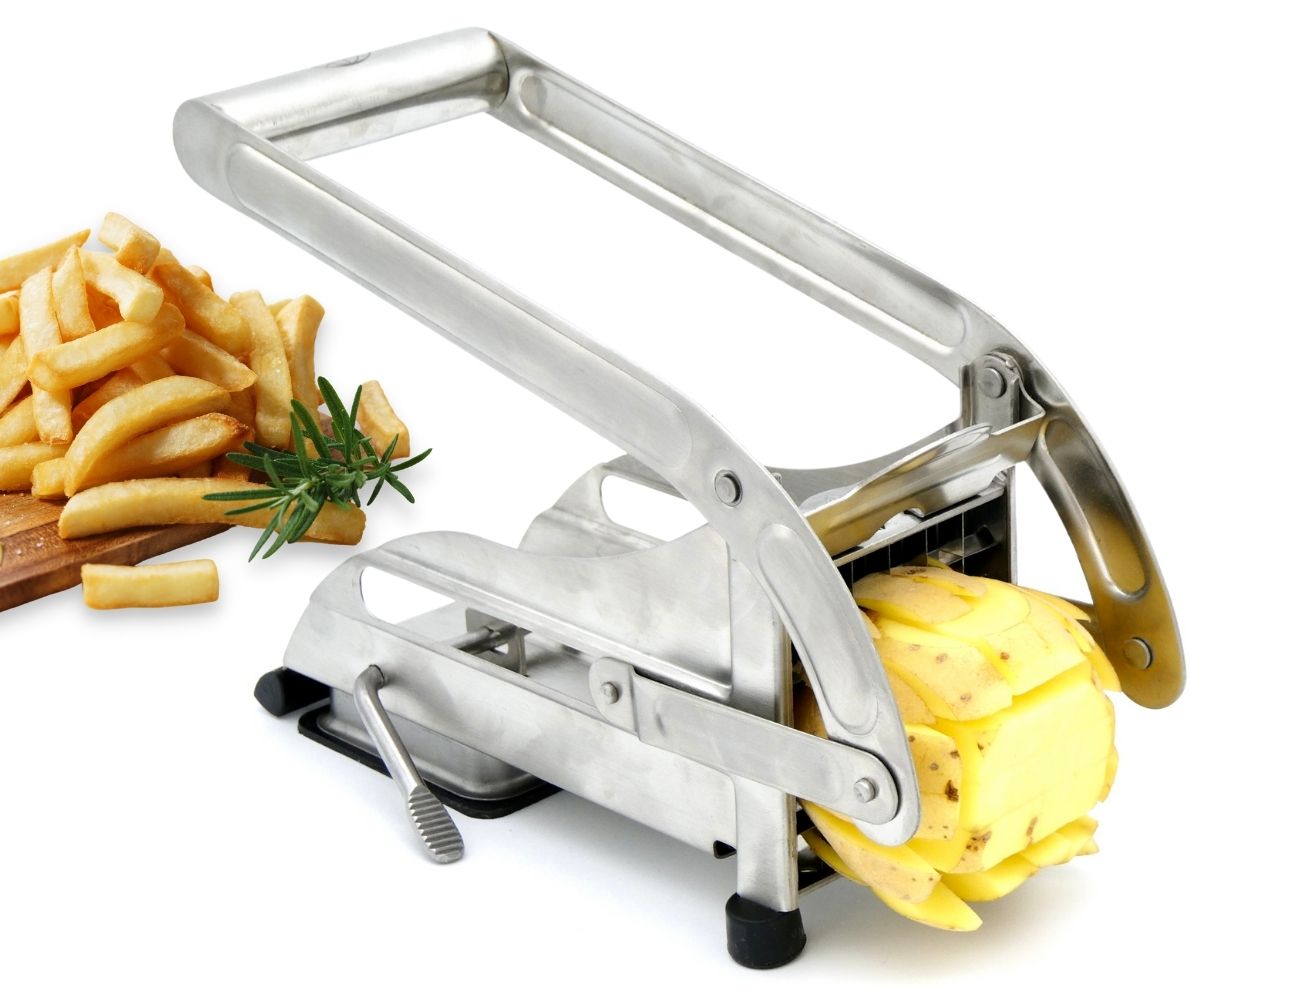 Pop AirFry Mate, Stainless Steel French Fry Cutter, Commercial Grade Vegetable and Potato Slicer, Includes 2 Blade Size Cutter options and No-Slip